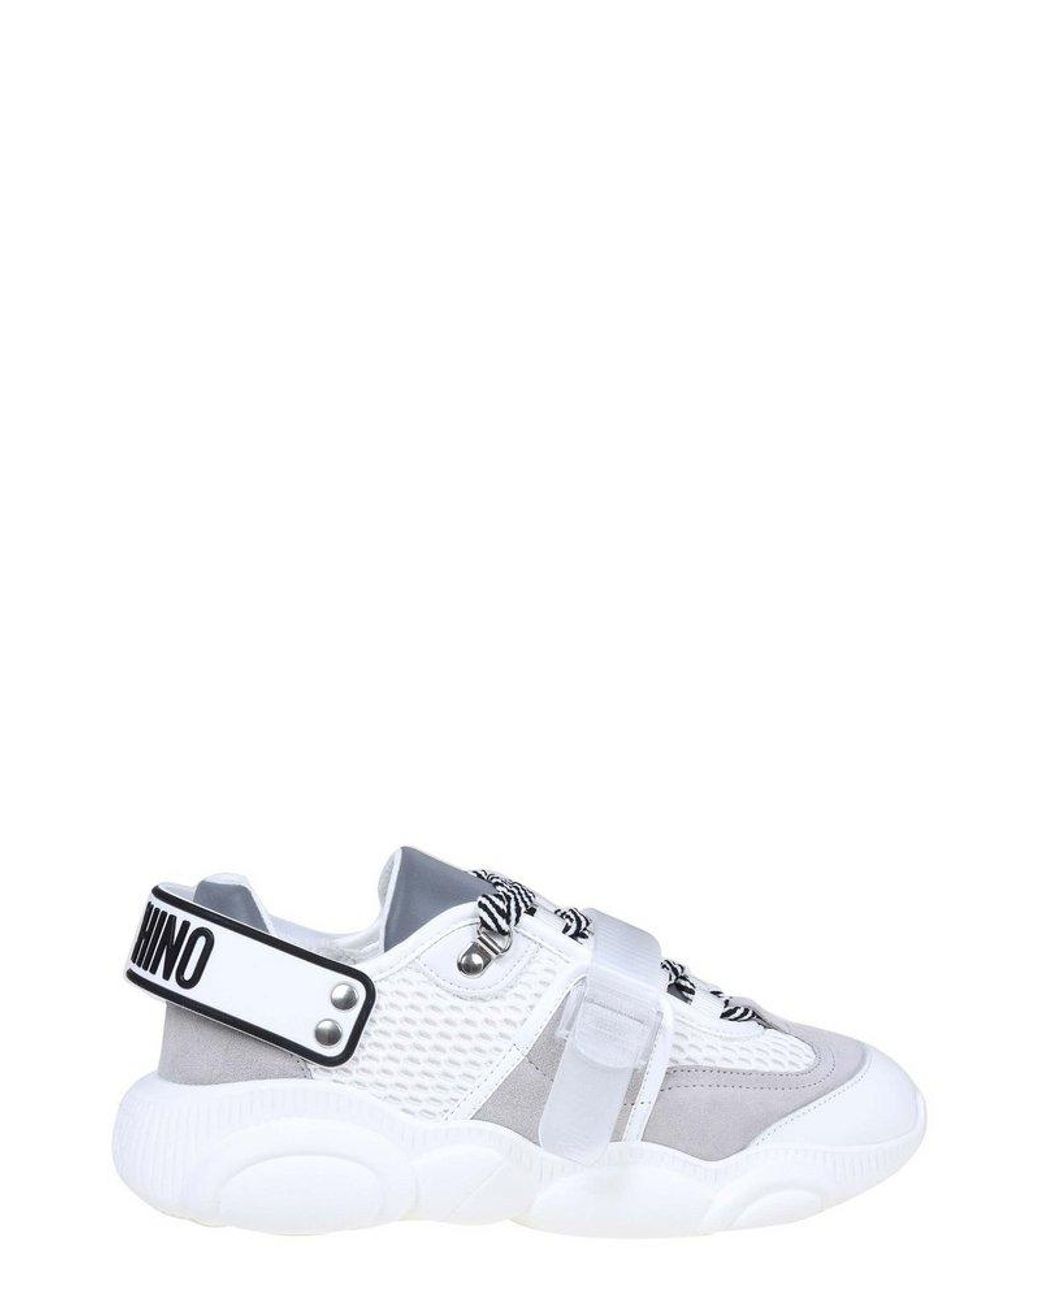 Moschino Teddy Meshed Low-top Sneakers in White | Lyst